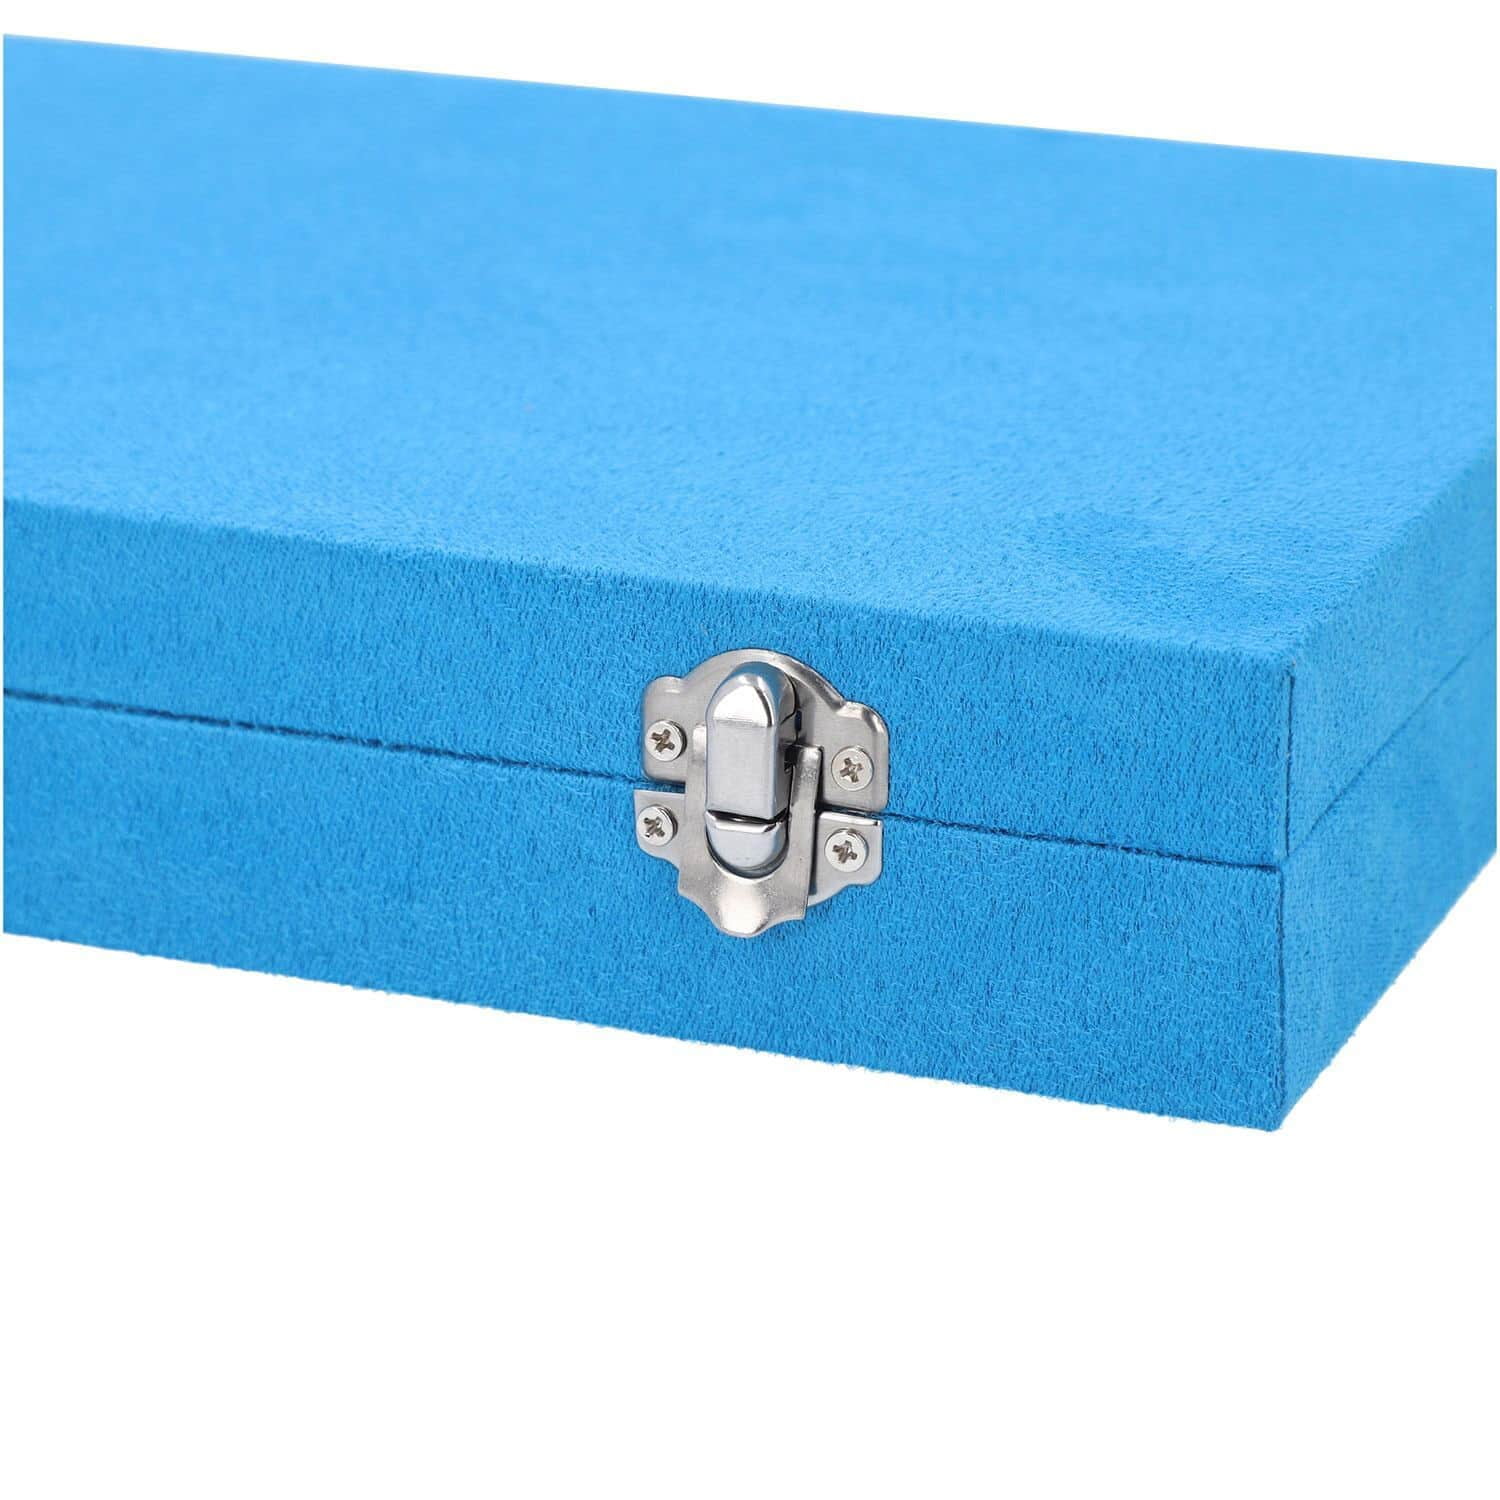 Buy Turquoise Faux Velvet Briefcase Style 2-tier Jewelry Box, Scratch  resistant and Anti-Tarnish Jewelry Storage Box, Anti Tarnish Jewelry Case,  Jewelry Organizer (Approx 60 Rings, etc.) at ShopLC.